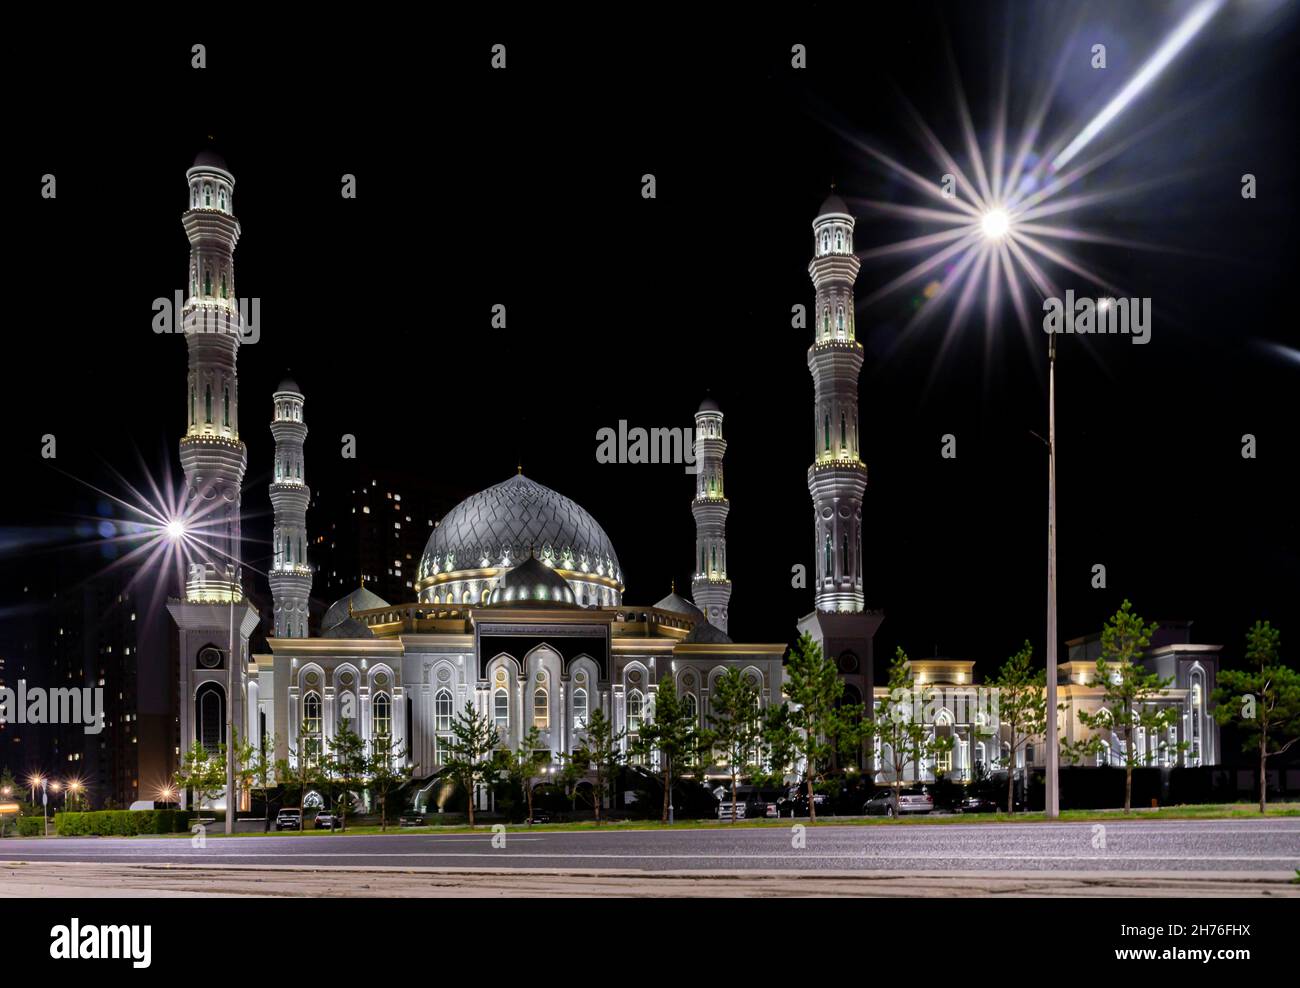 Night view of Hazrat Sultan Mosque, Astana, Nur-Sultan, Kazakhstan. Opened in 2012. It is the largest mosque in Central Asia. Stock Photo